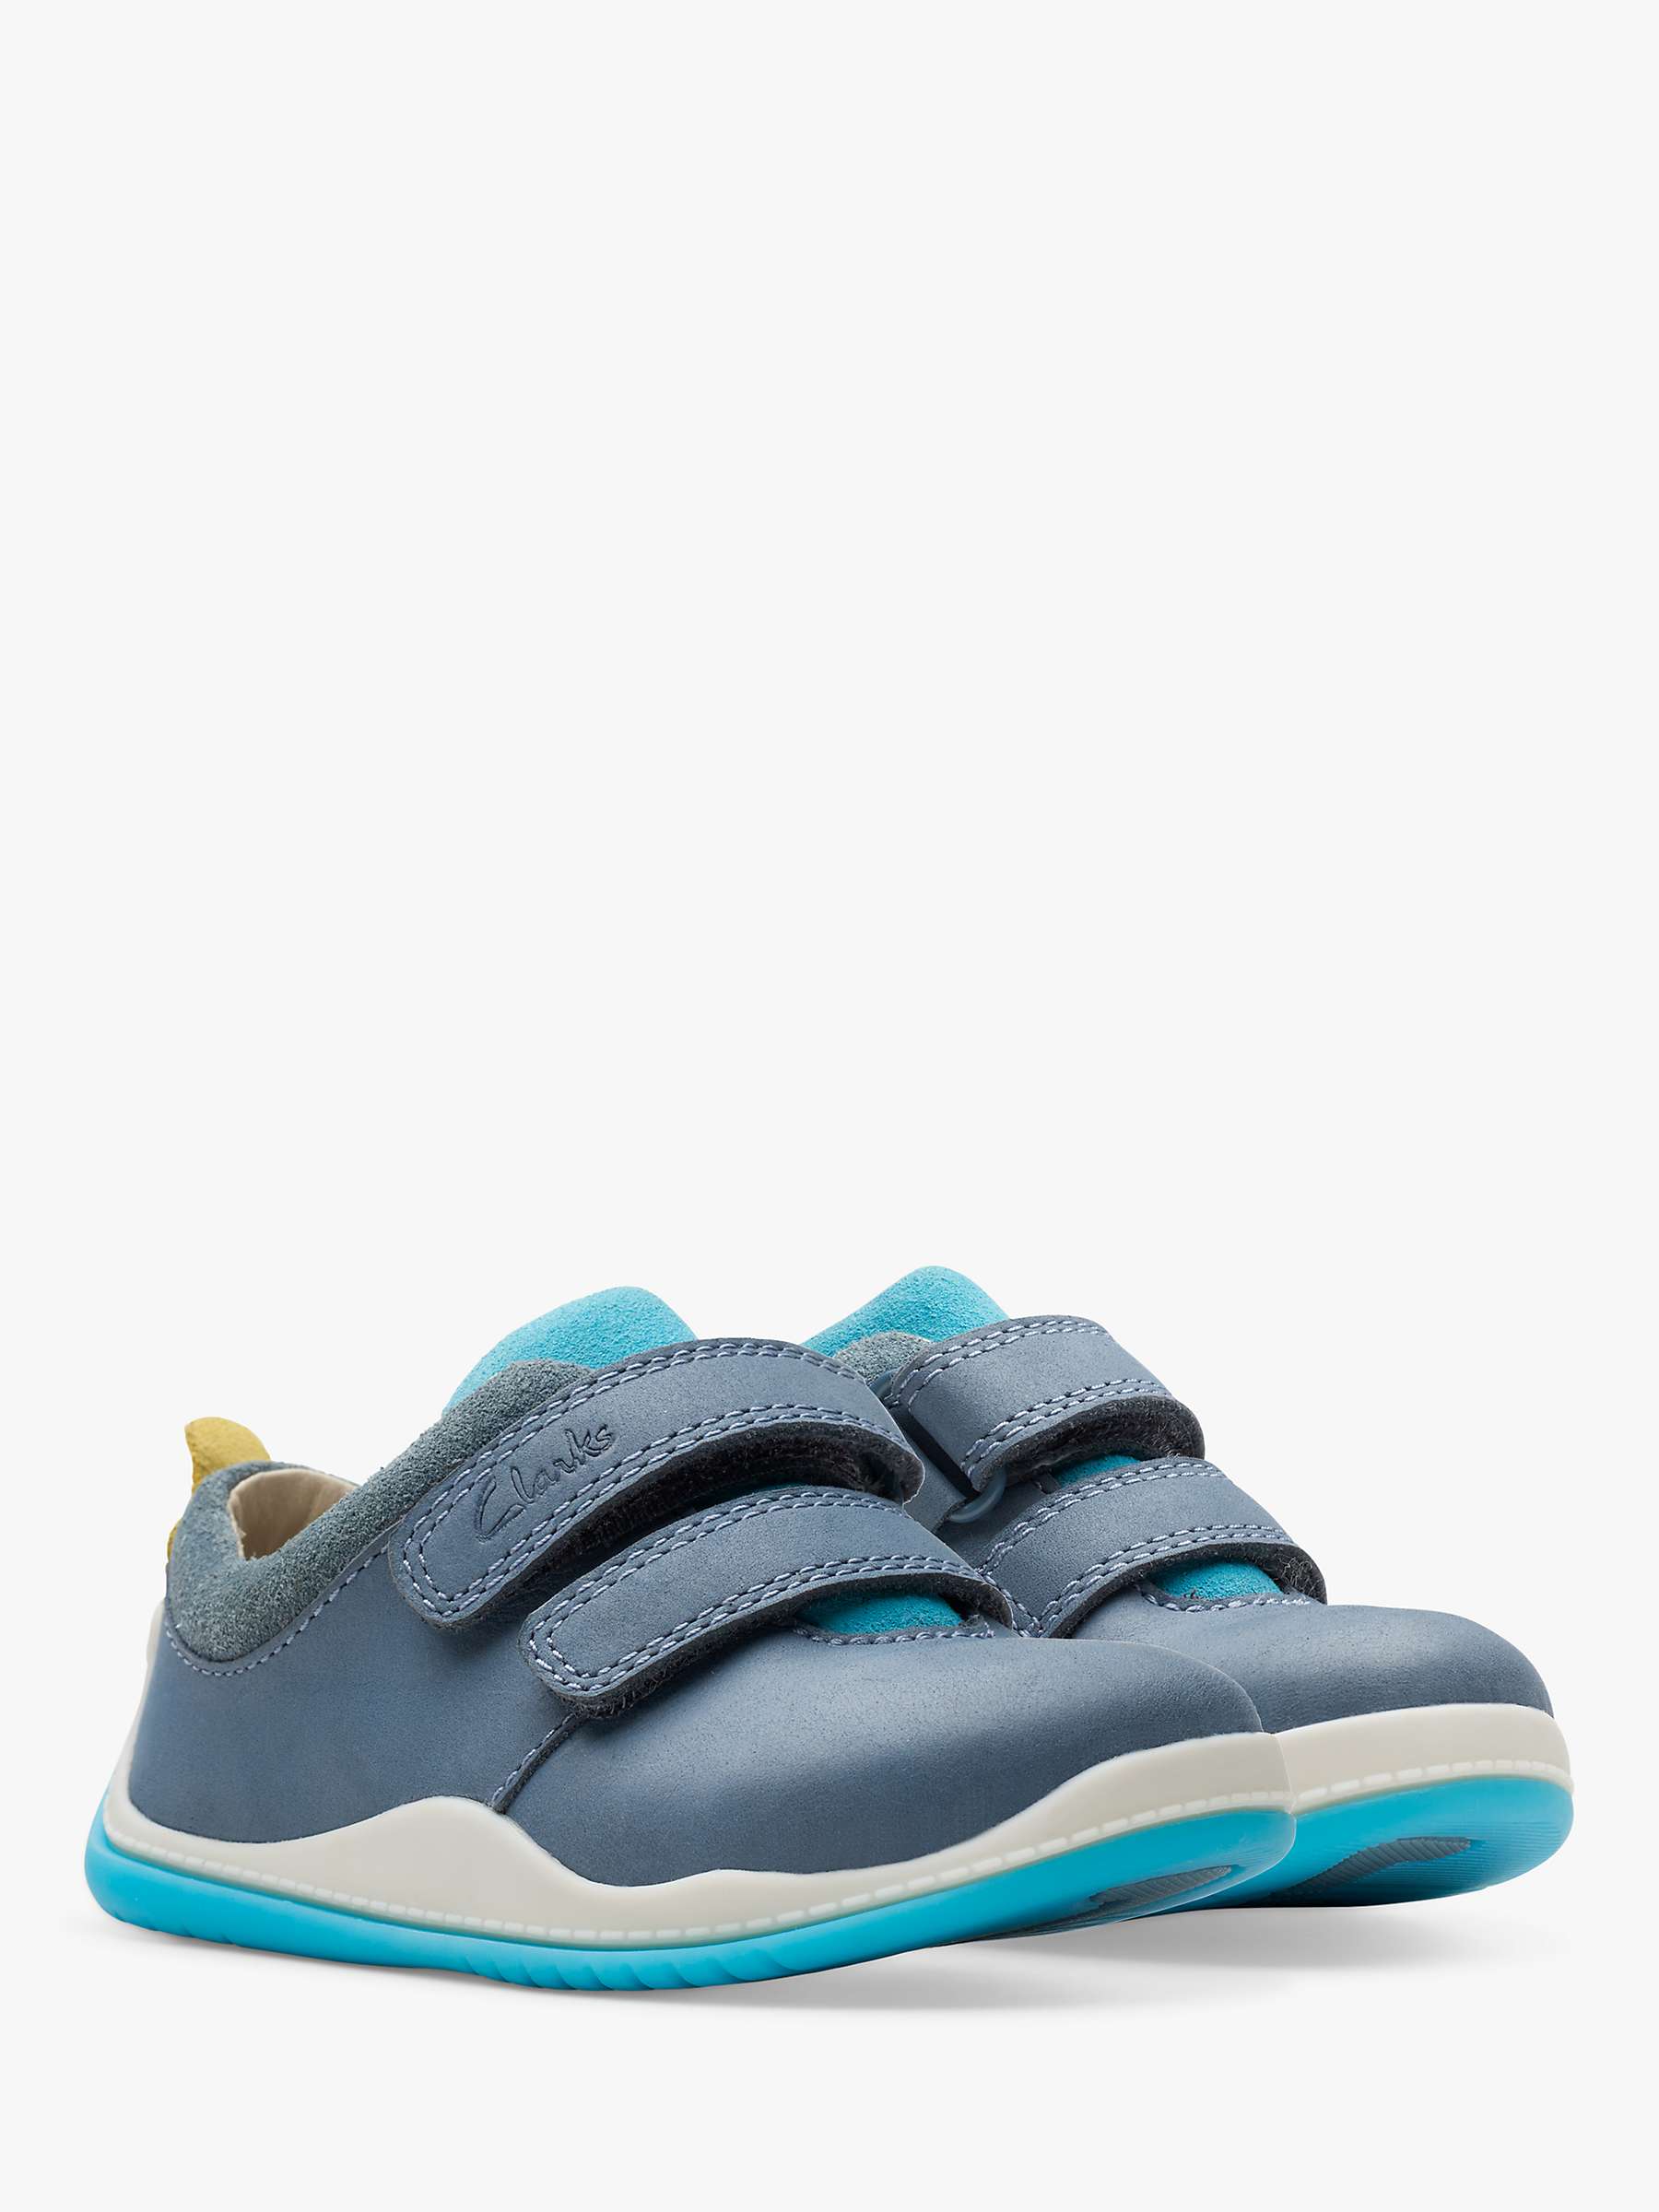 Buy Clarks Kids' Noodle Fun First Trainers, Steel Blue Online at johnlewis.com